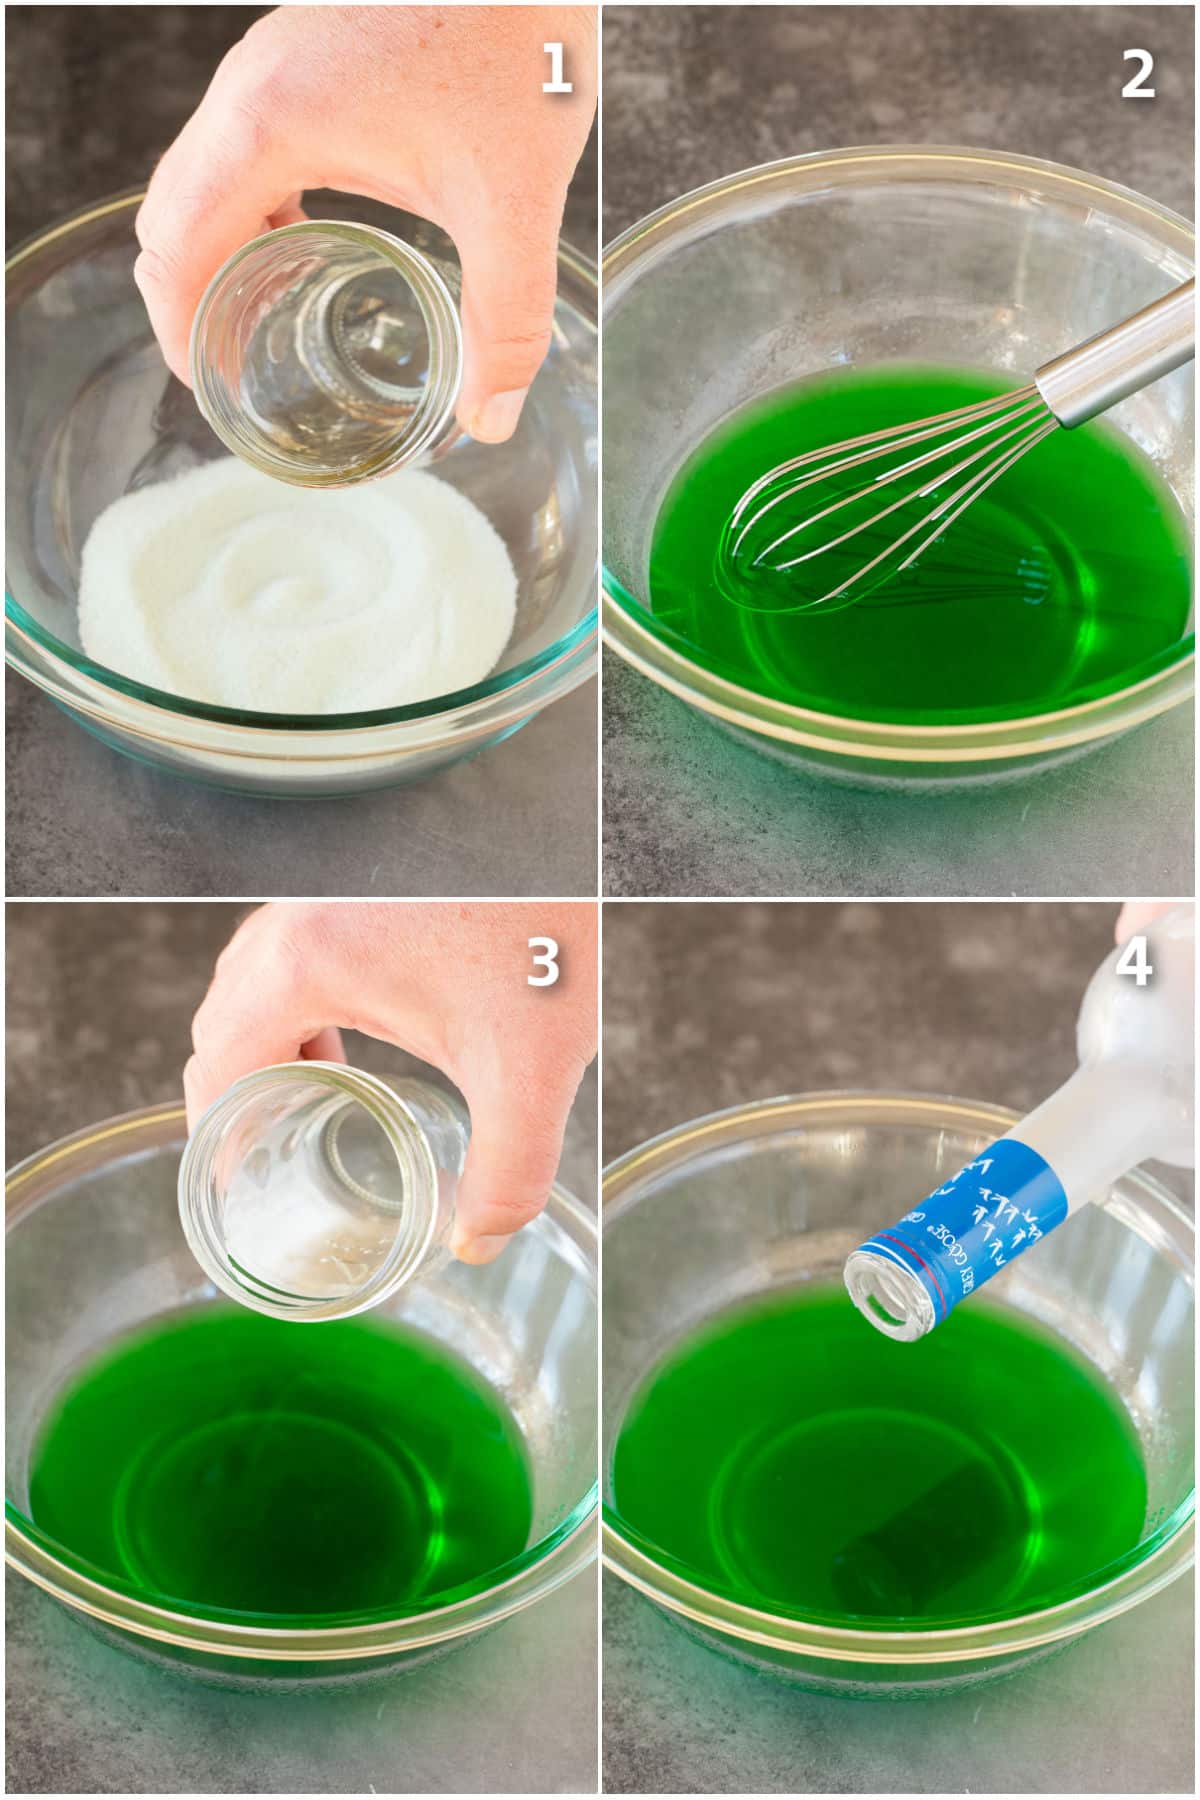 Step by step process shots showing how to make vodka gelatin.